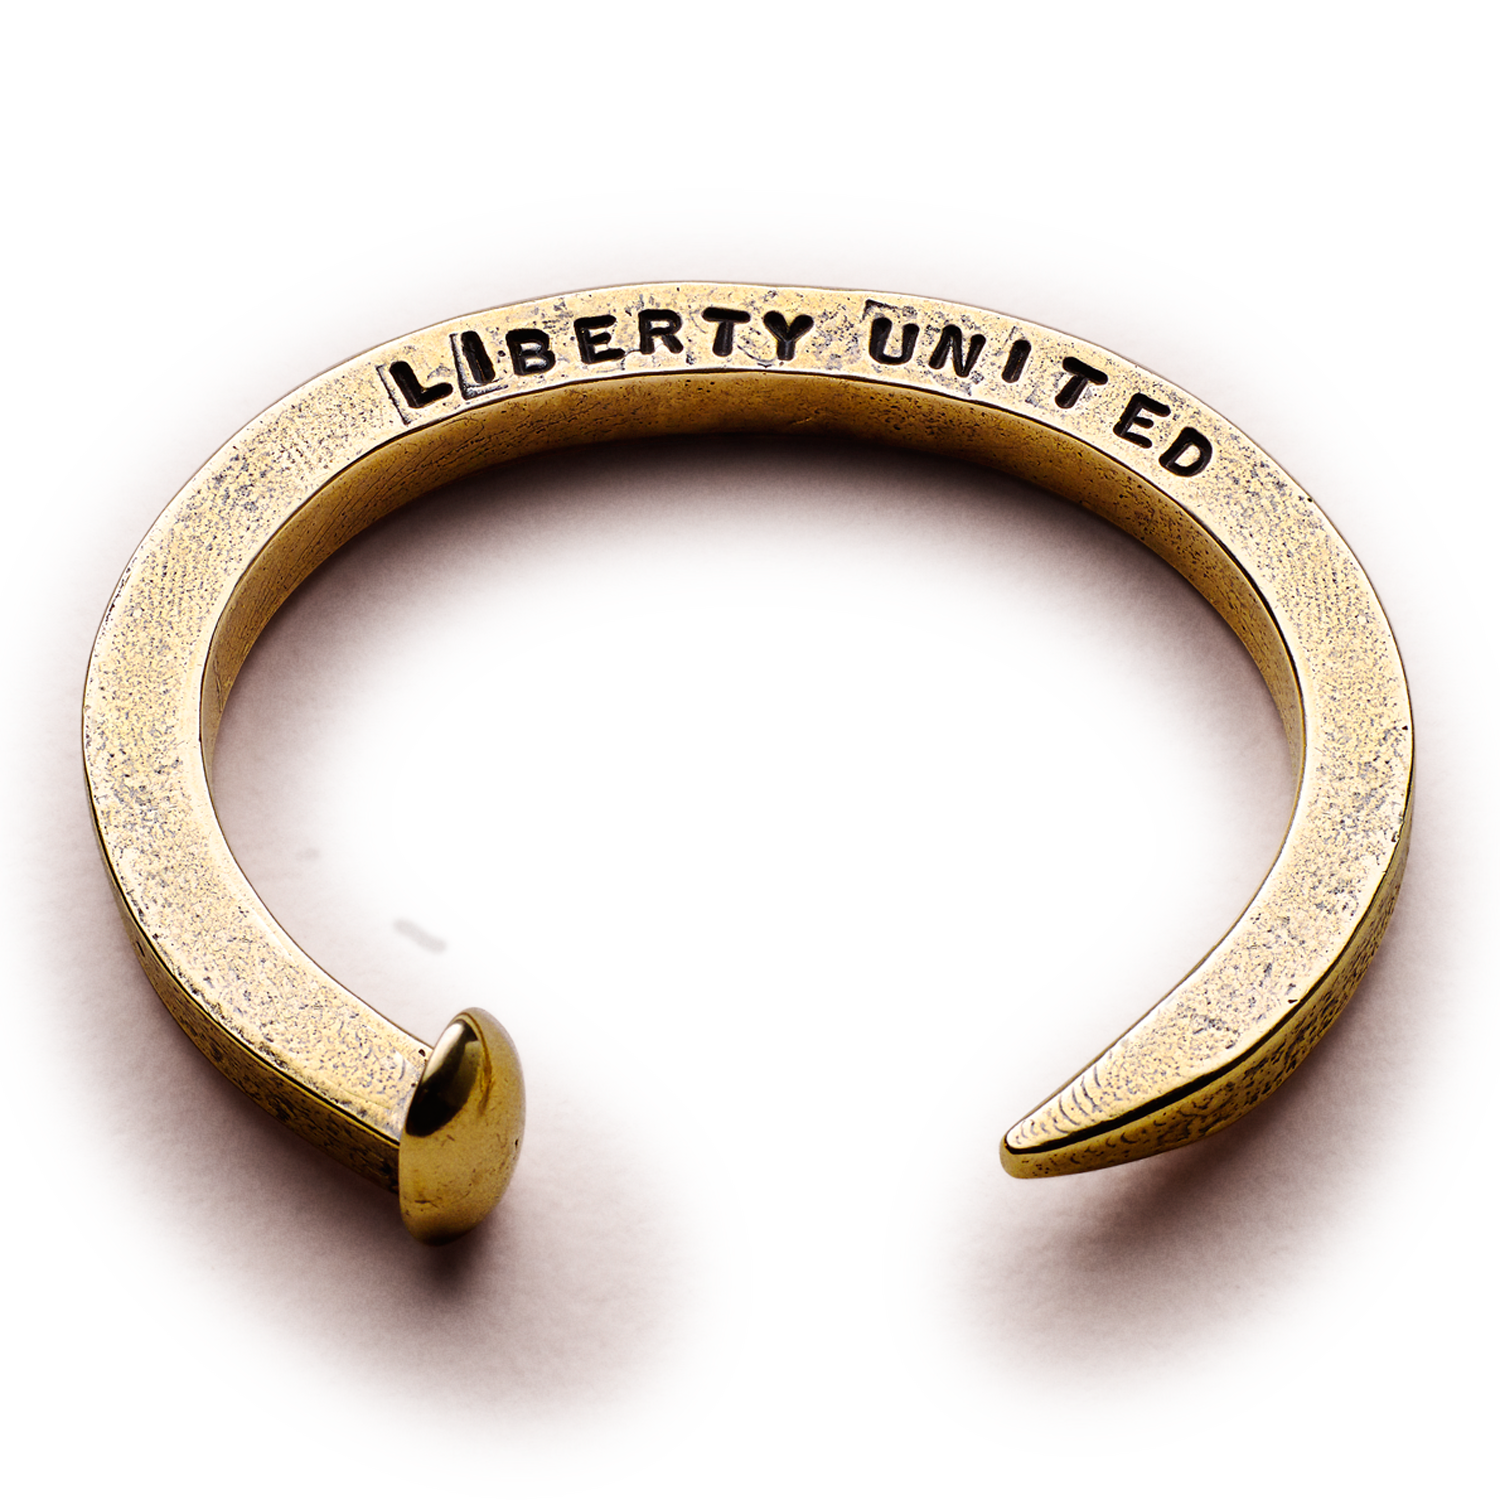 Railroad Spike Bullet Cuff by Giles & Brother for Liberty United